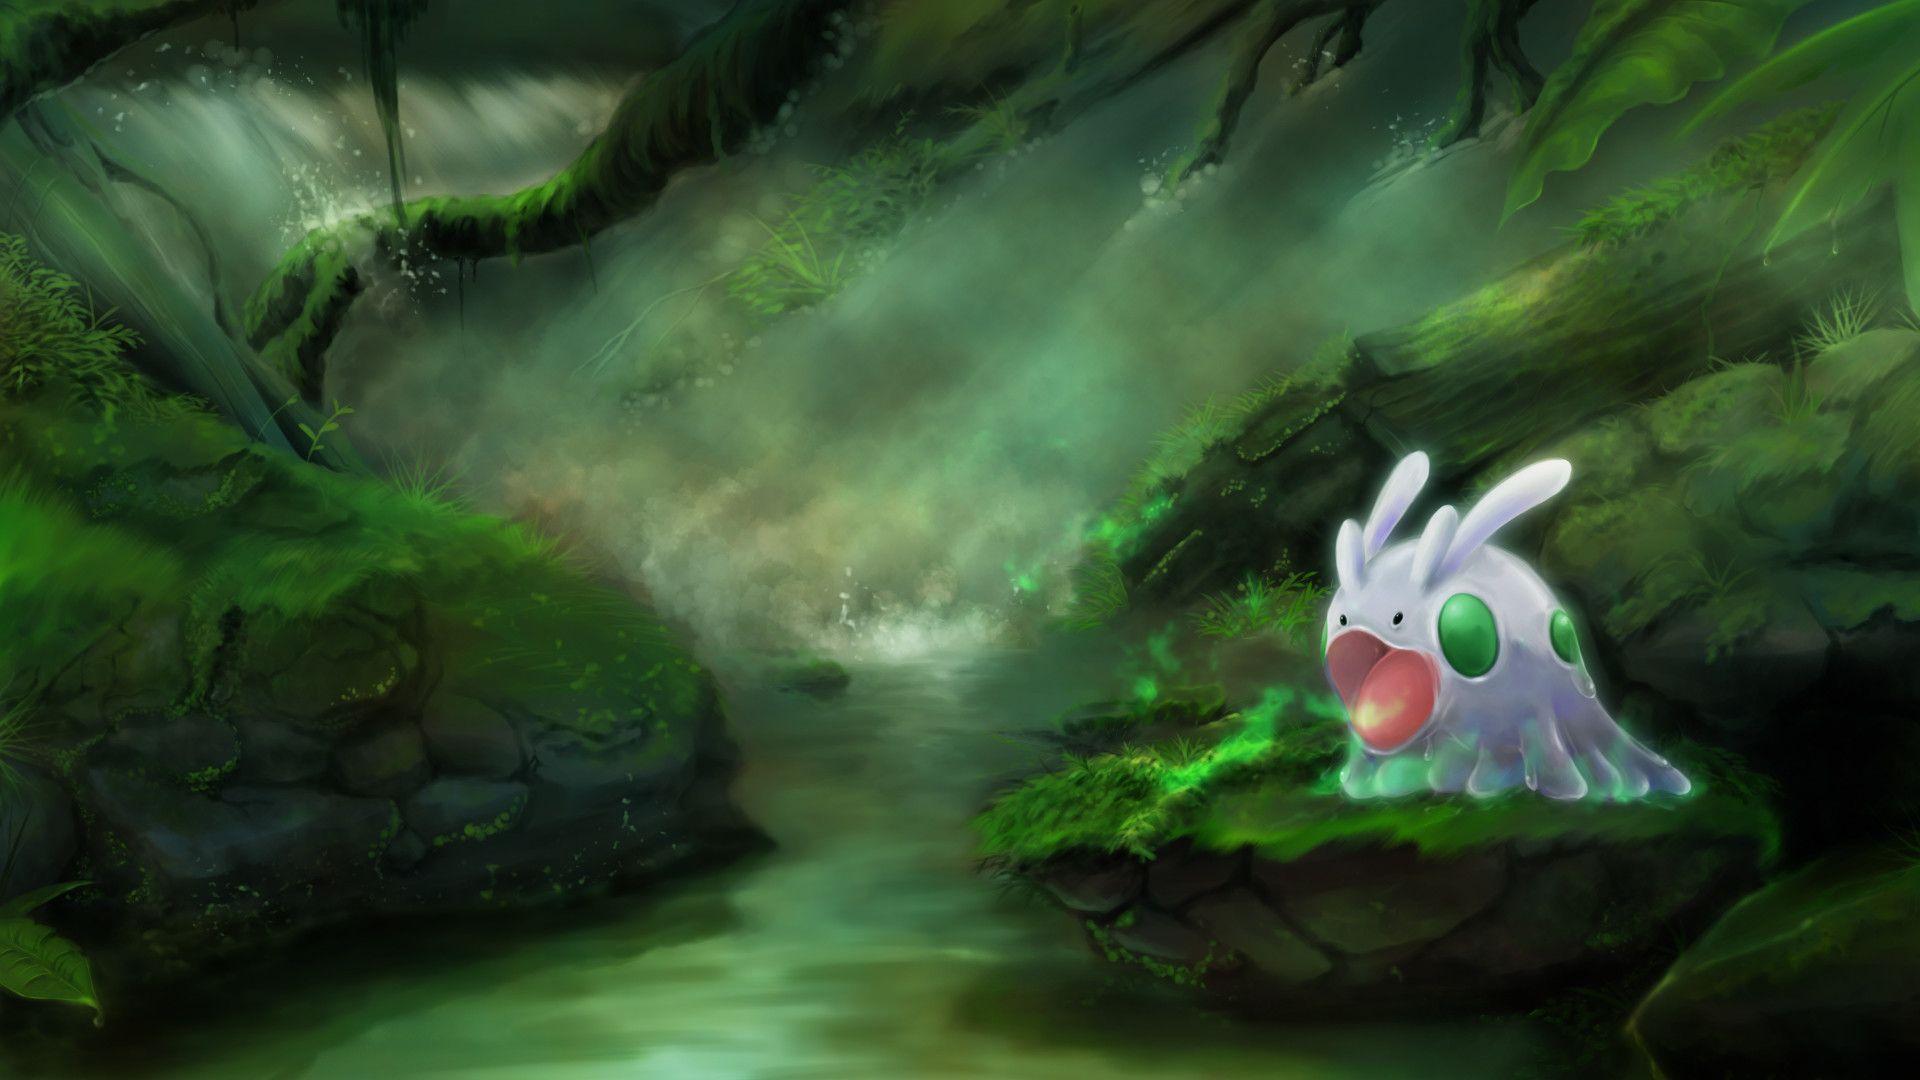 Goomy in the swamp, chinglun chang